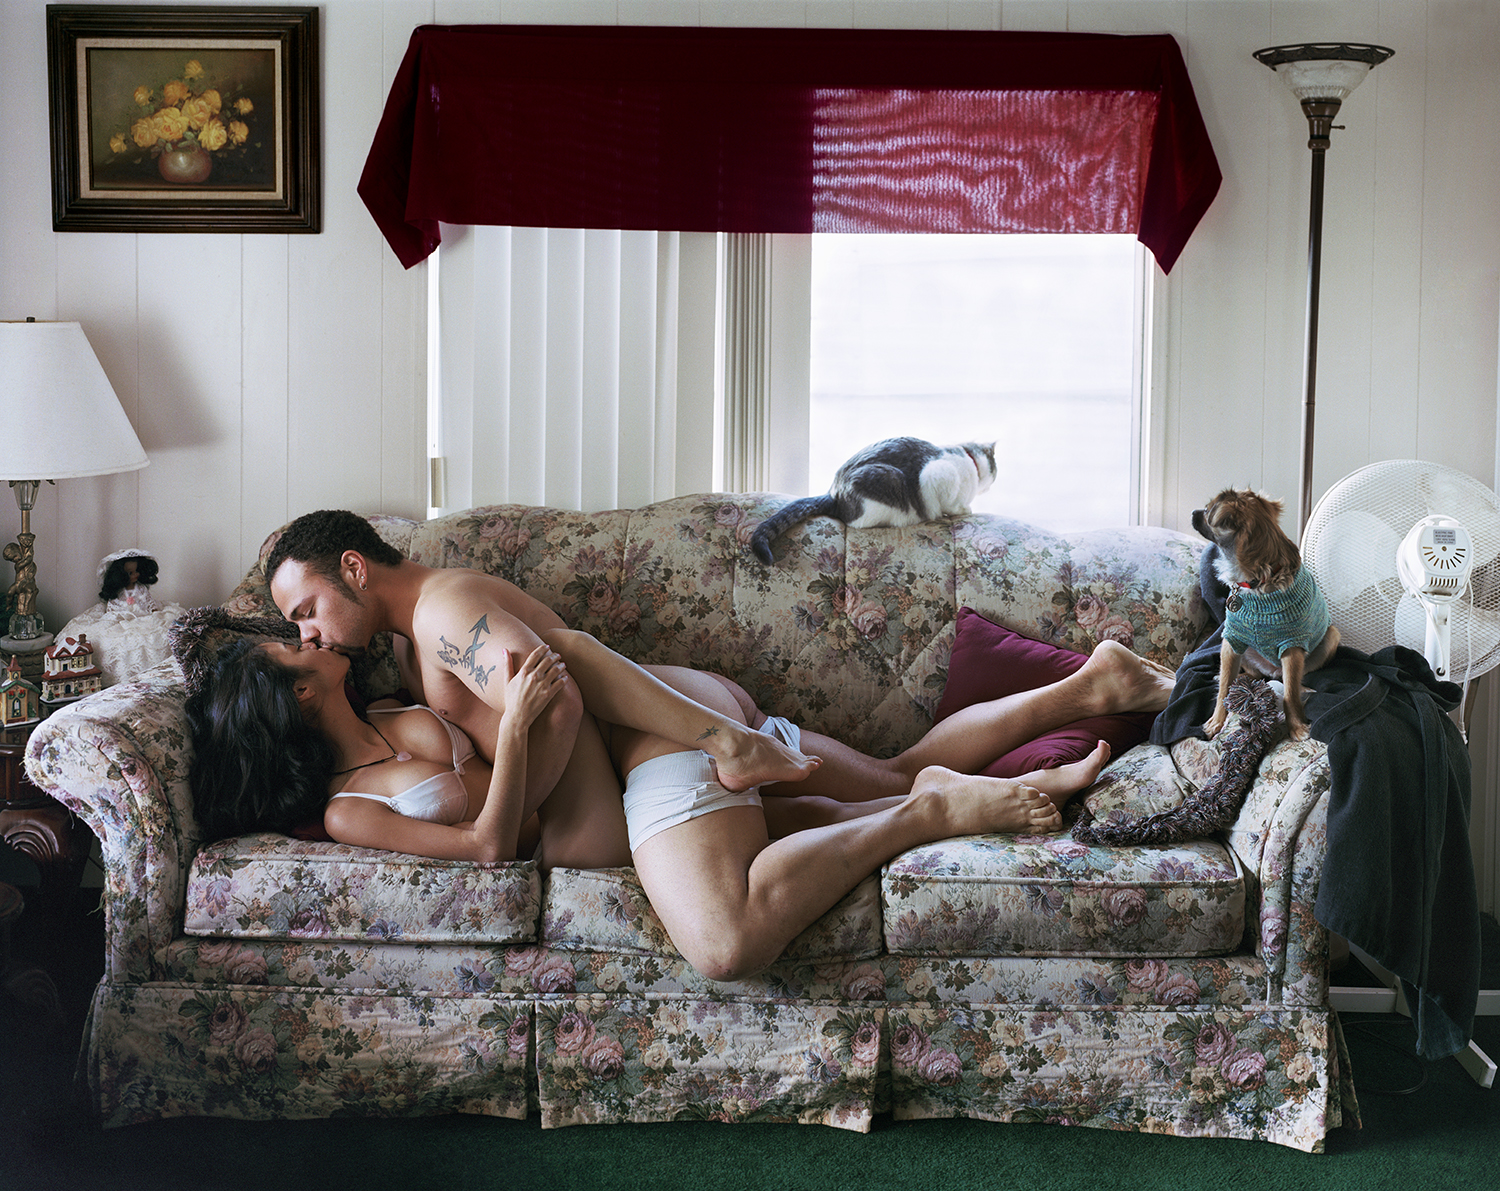   The Couch  Archival pigment print 27 x 34 inches      ———— 